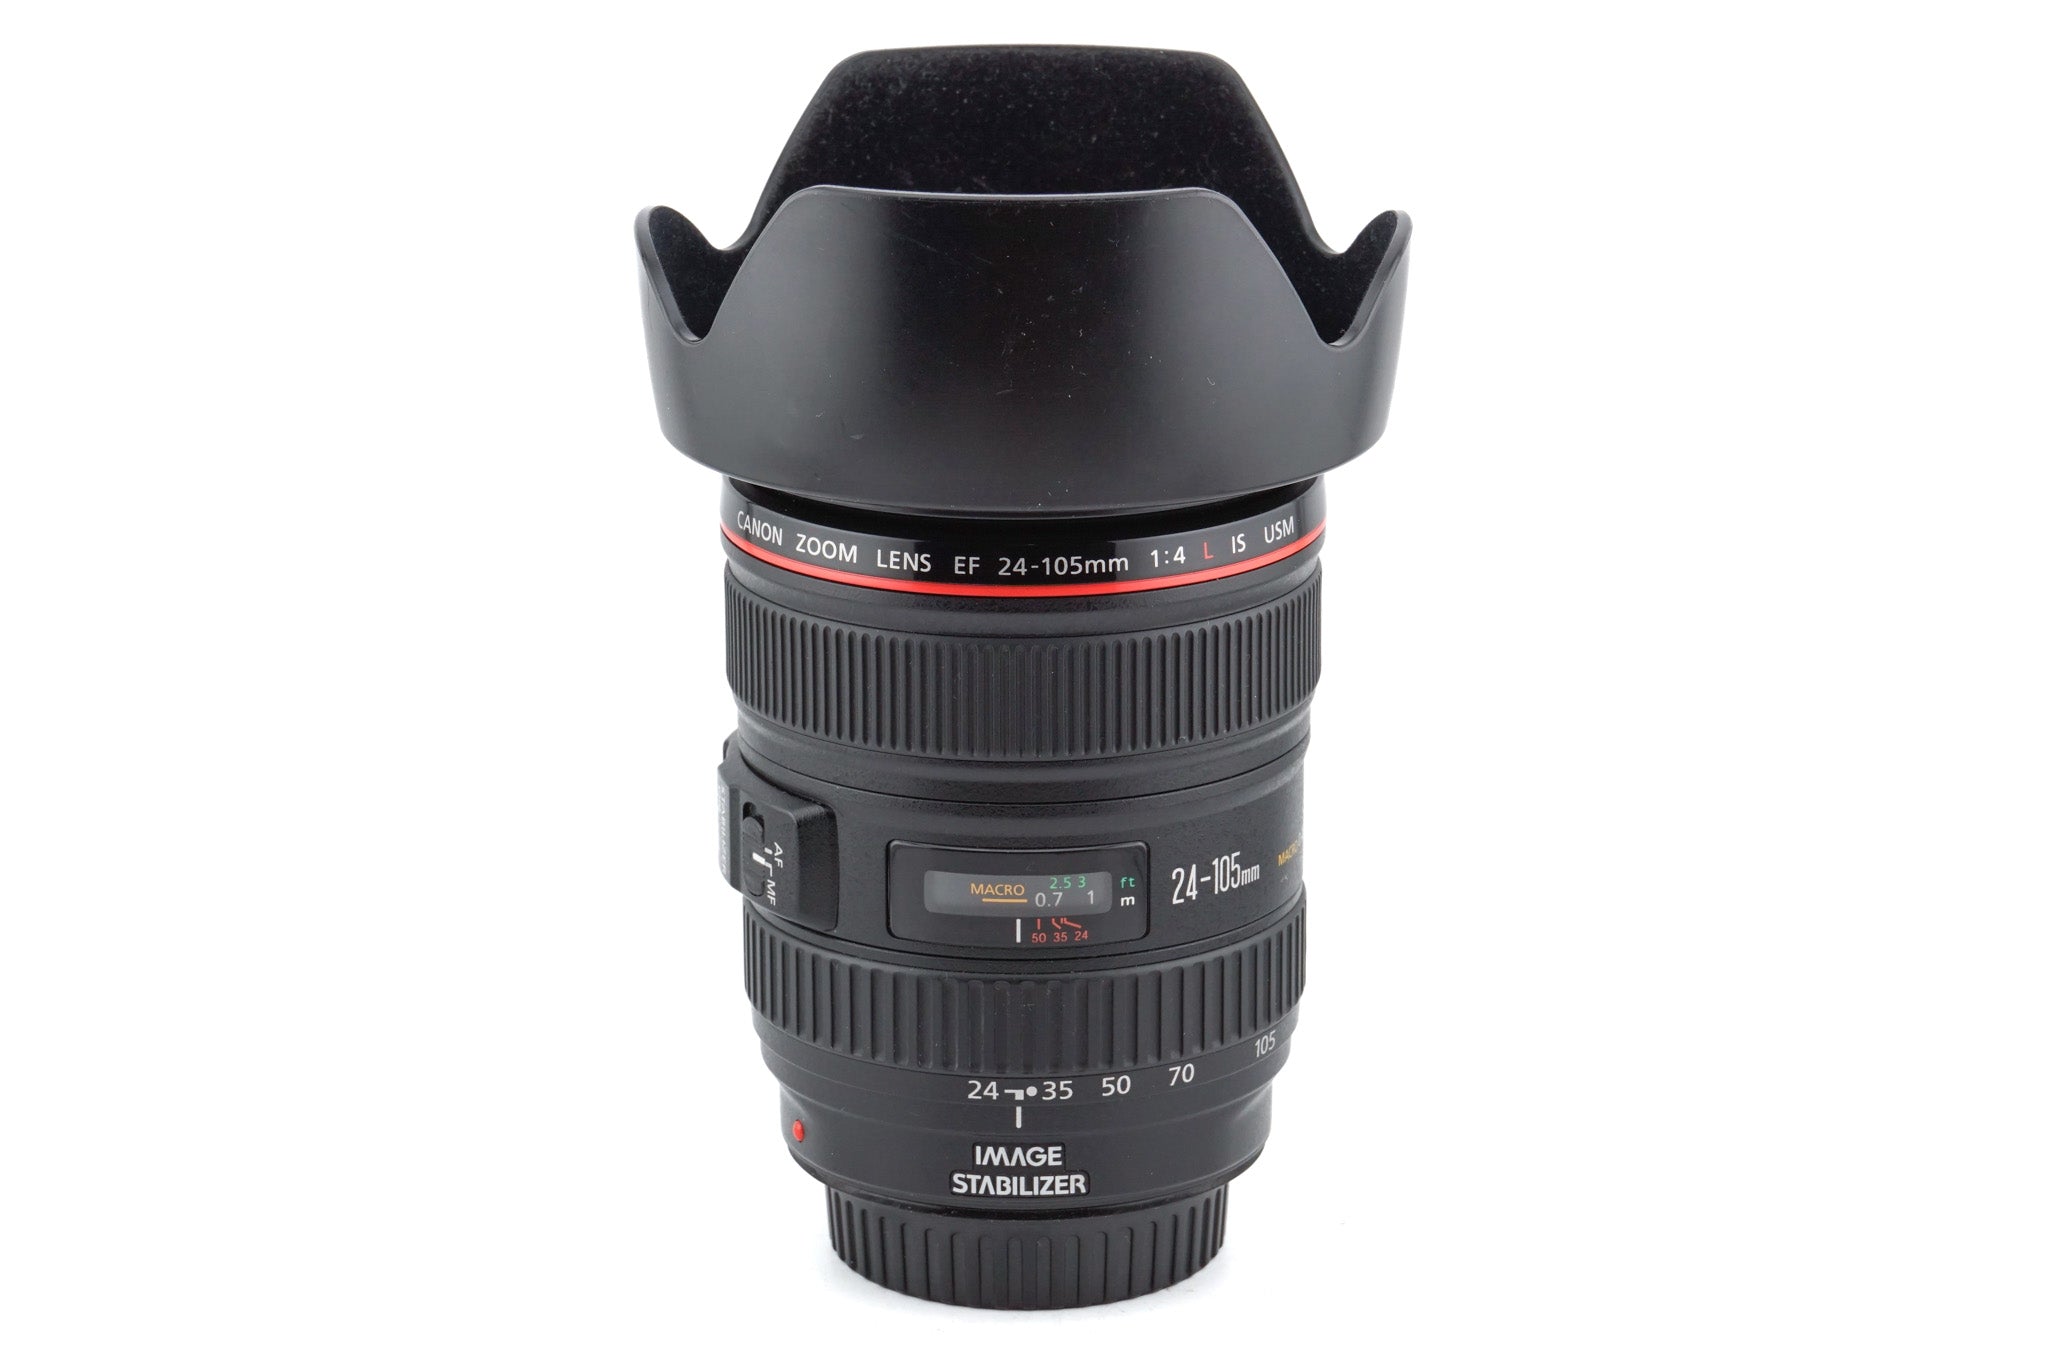 Canon 24-105mm f4 L IS USM